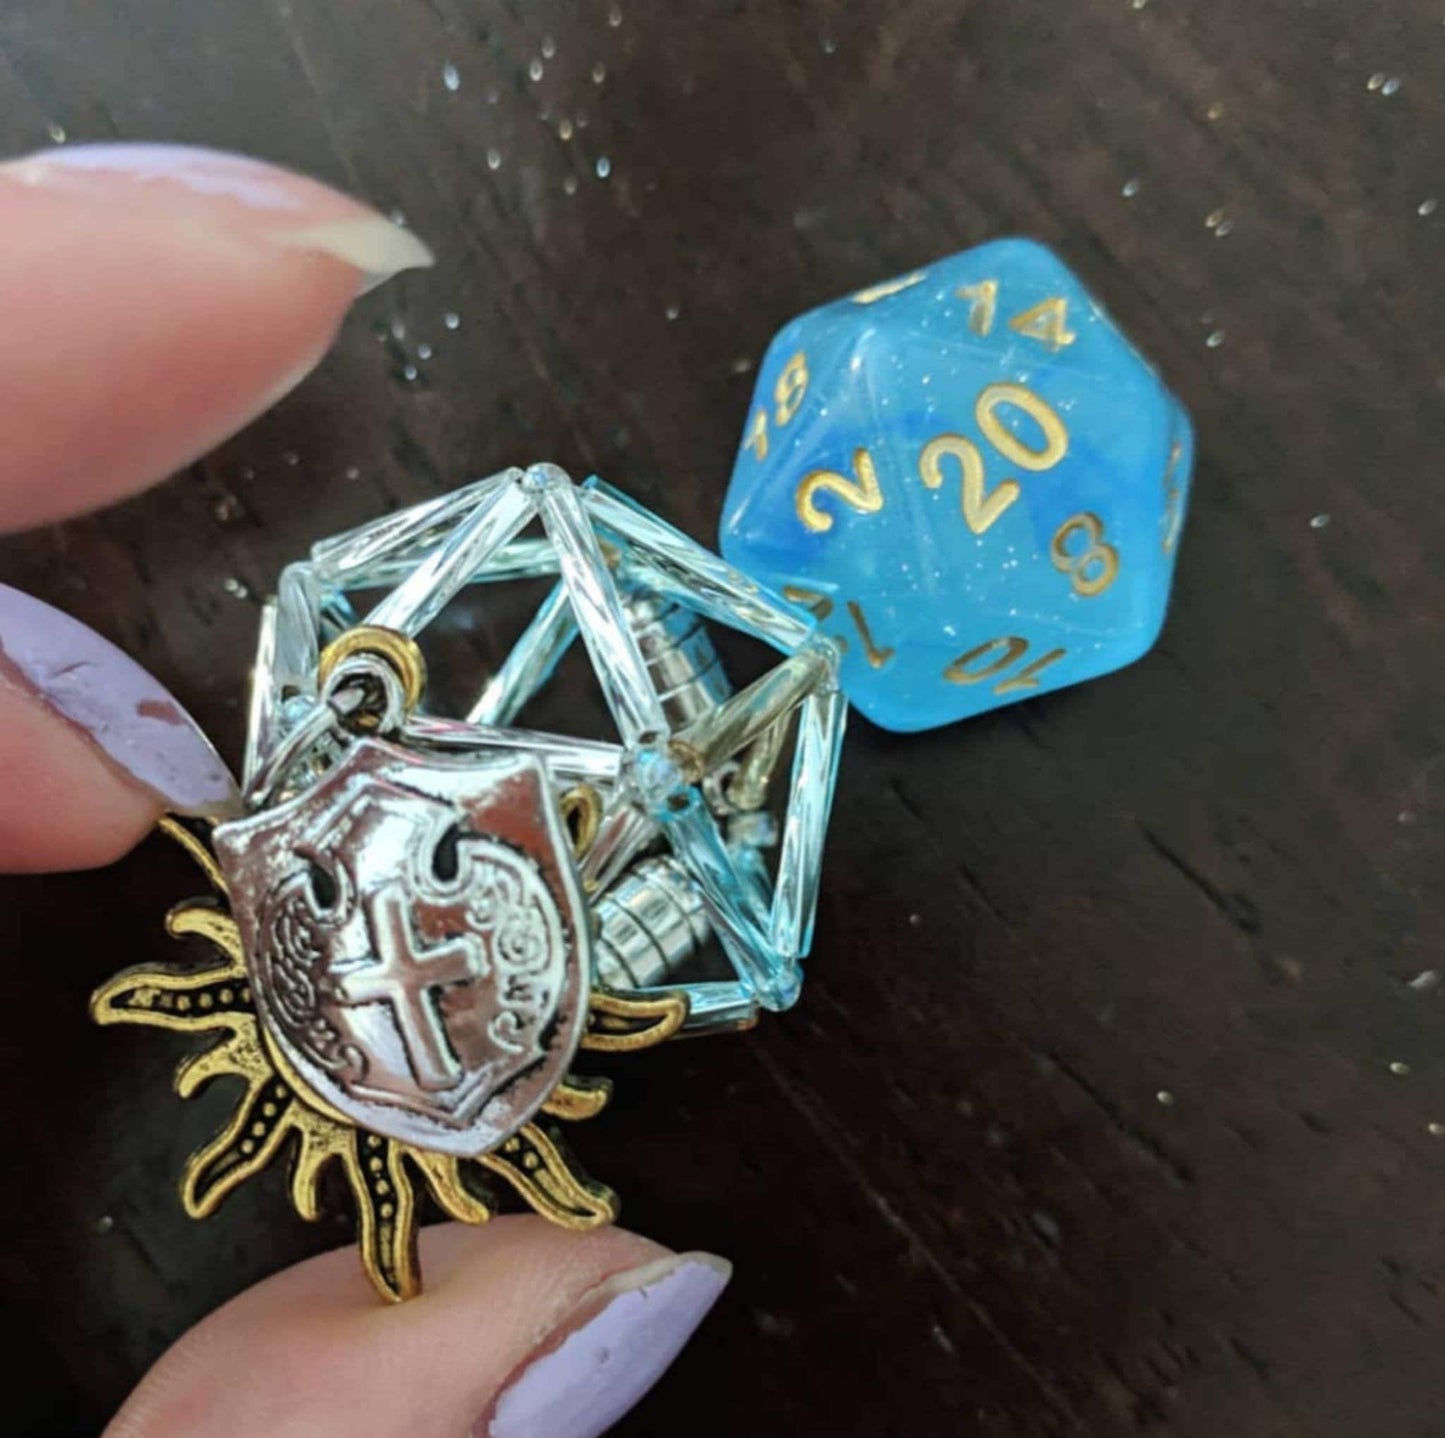 Pike necklace: silver and light blue D20 cage with two charms. A golden sun and silver shield.